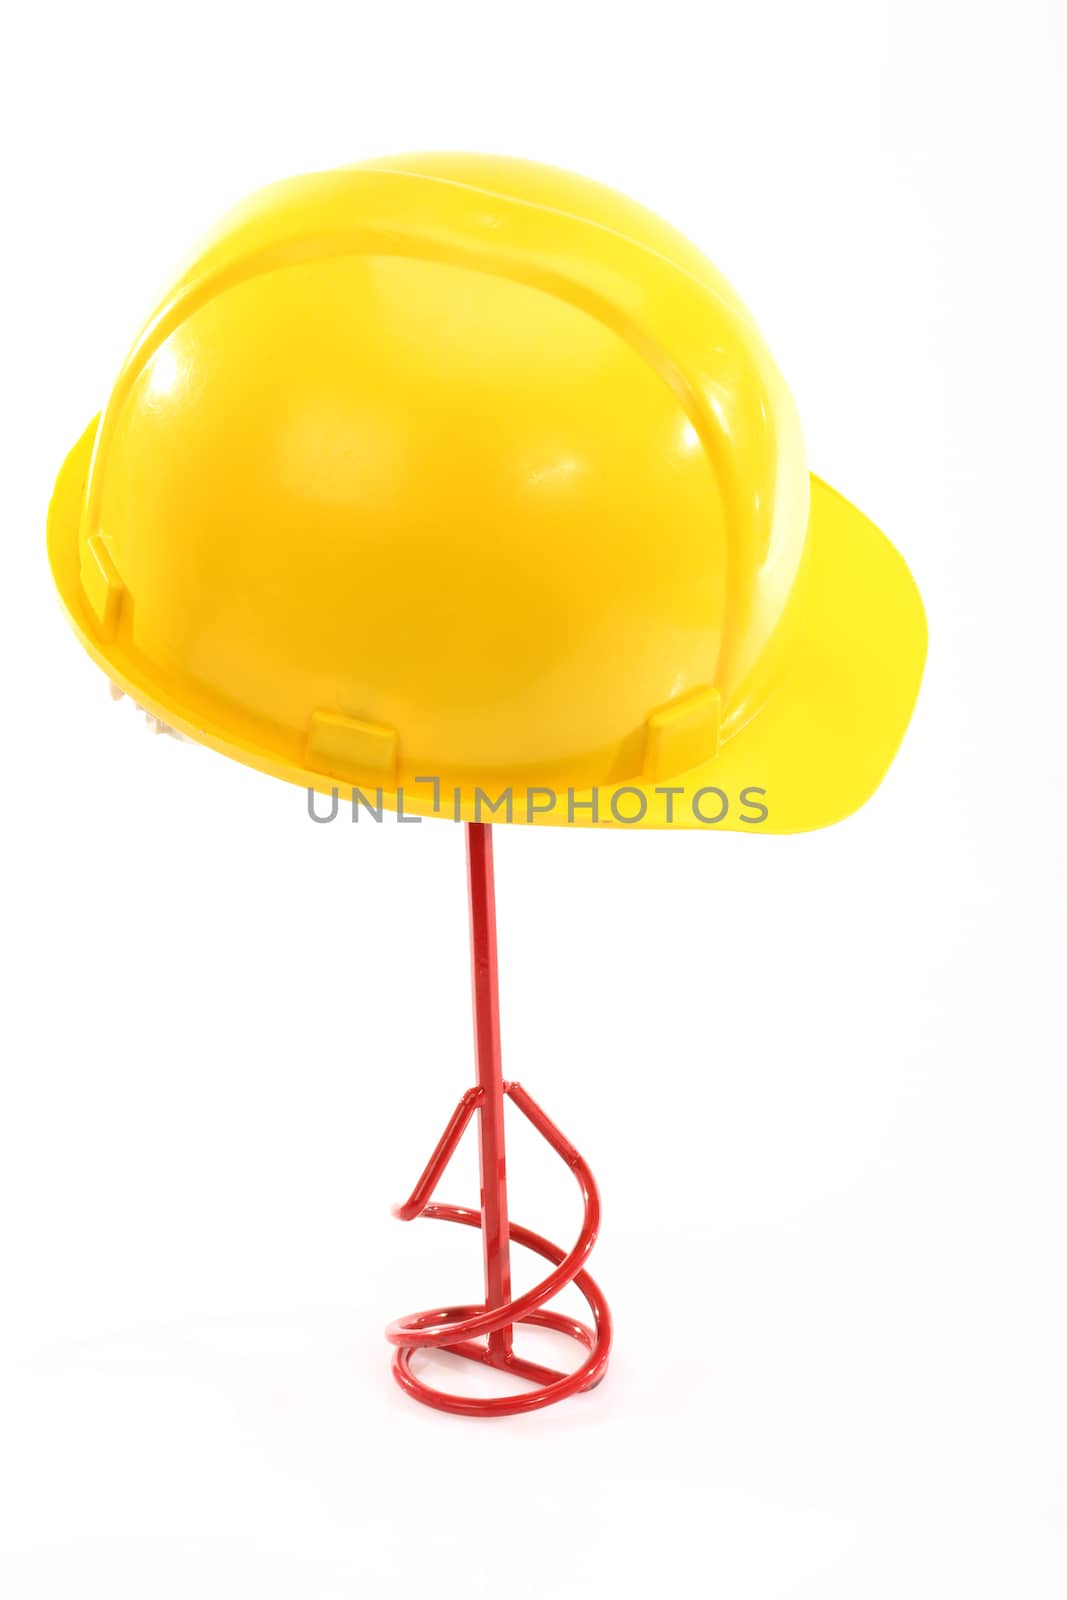 Yellow protective helmet and red industrial stirrer over white